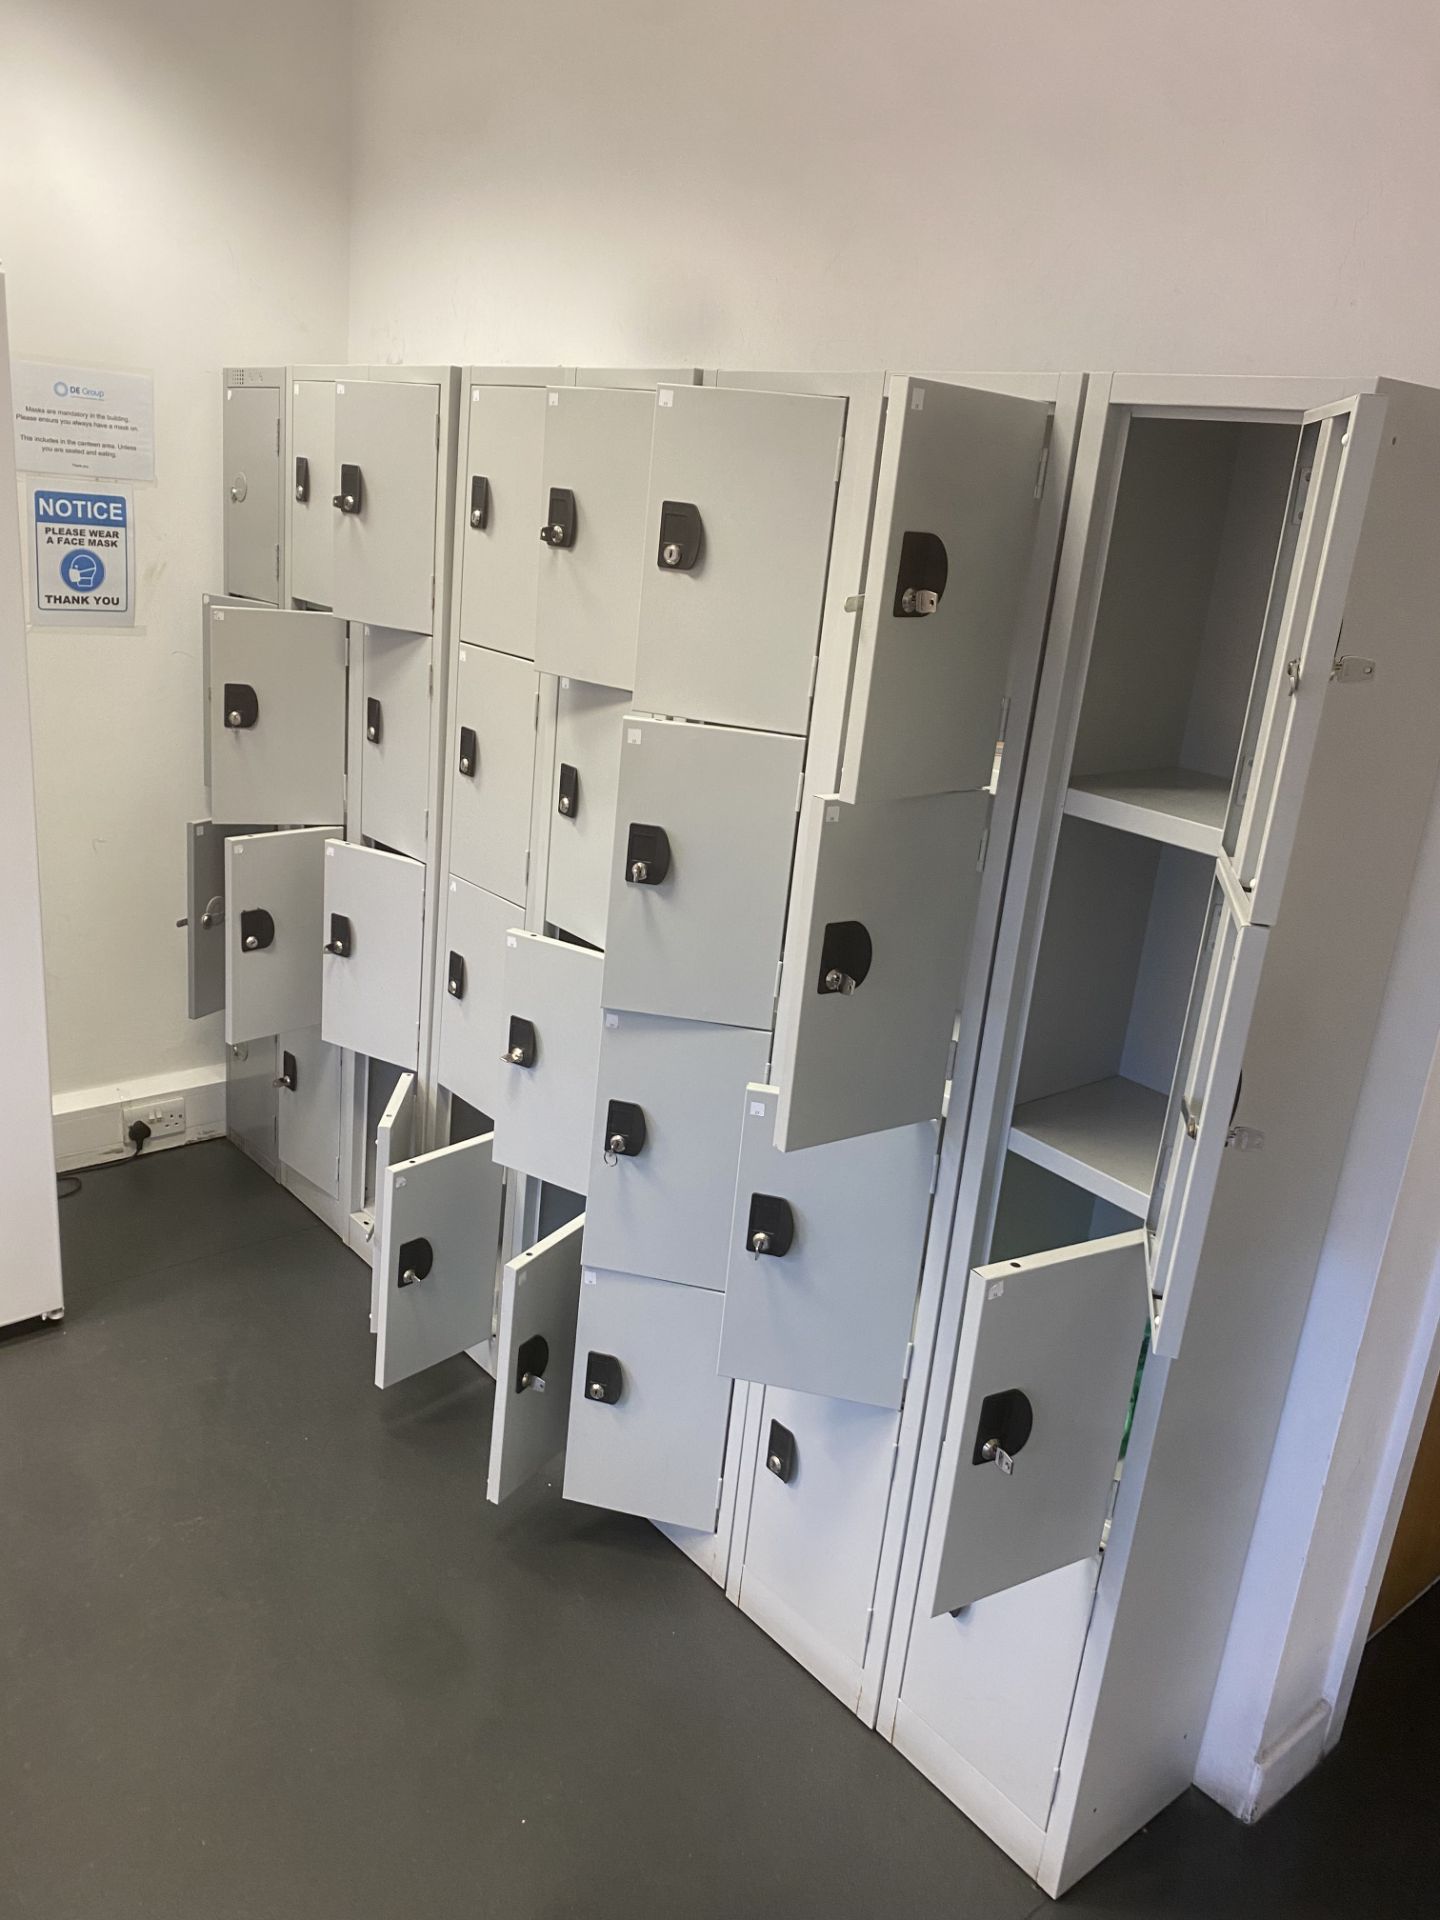 SET OF 7 STACKS OF 4 LOCKERS STAFF CANTEEN GYM - Image 5 of 5